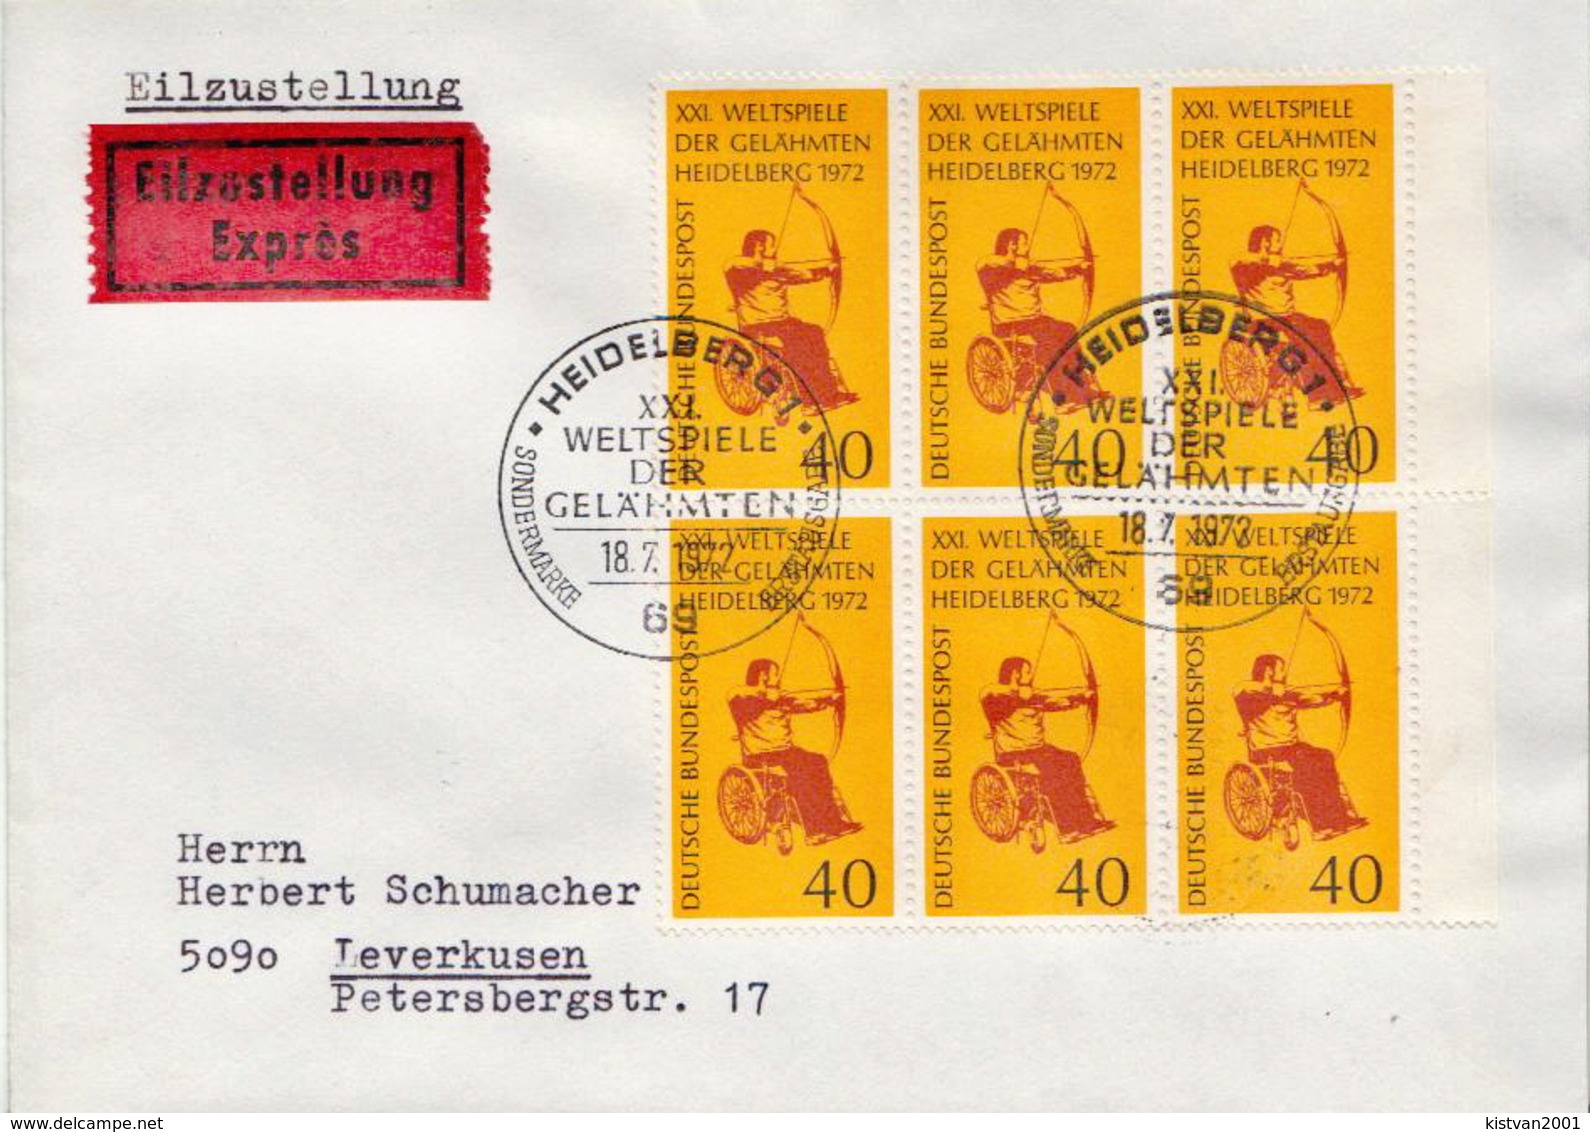 Postal History Cover: Germany Stamps On Express Cover - Bogenschiessen